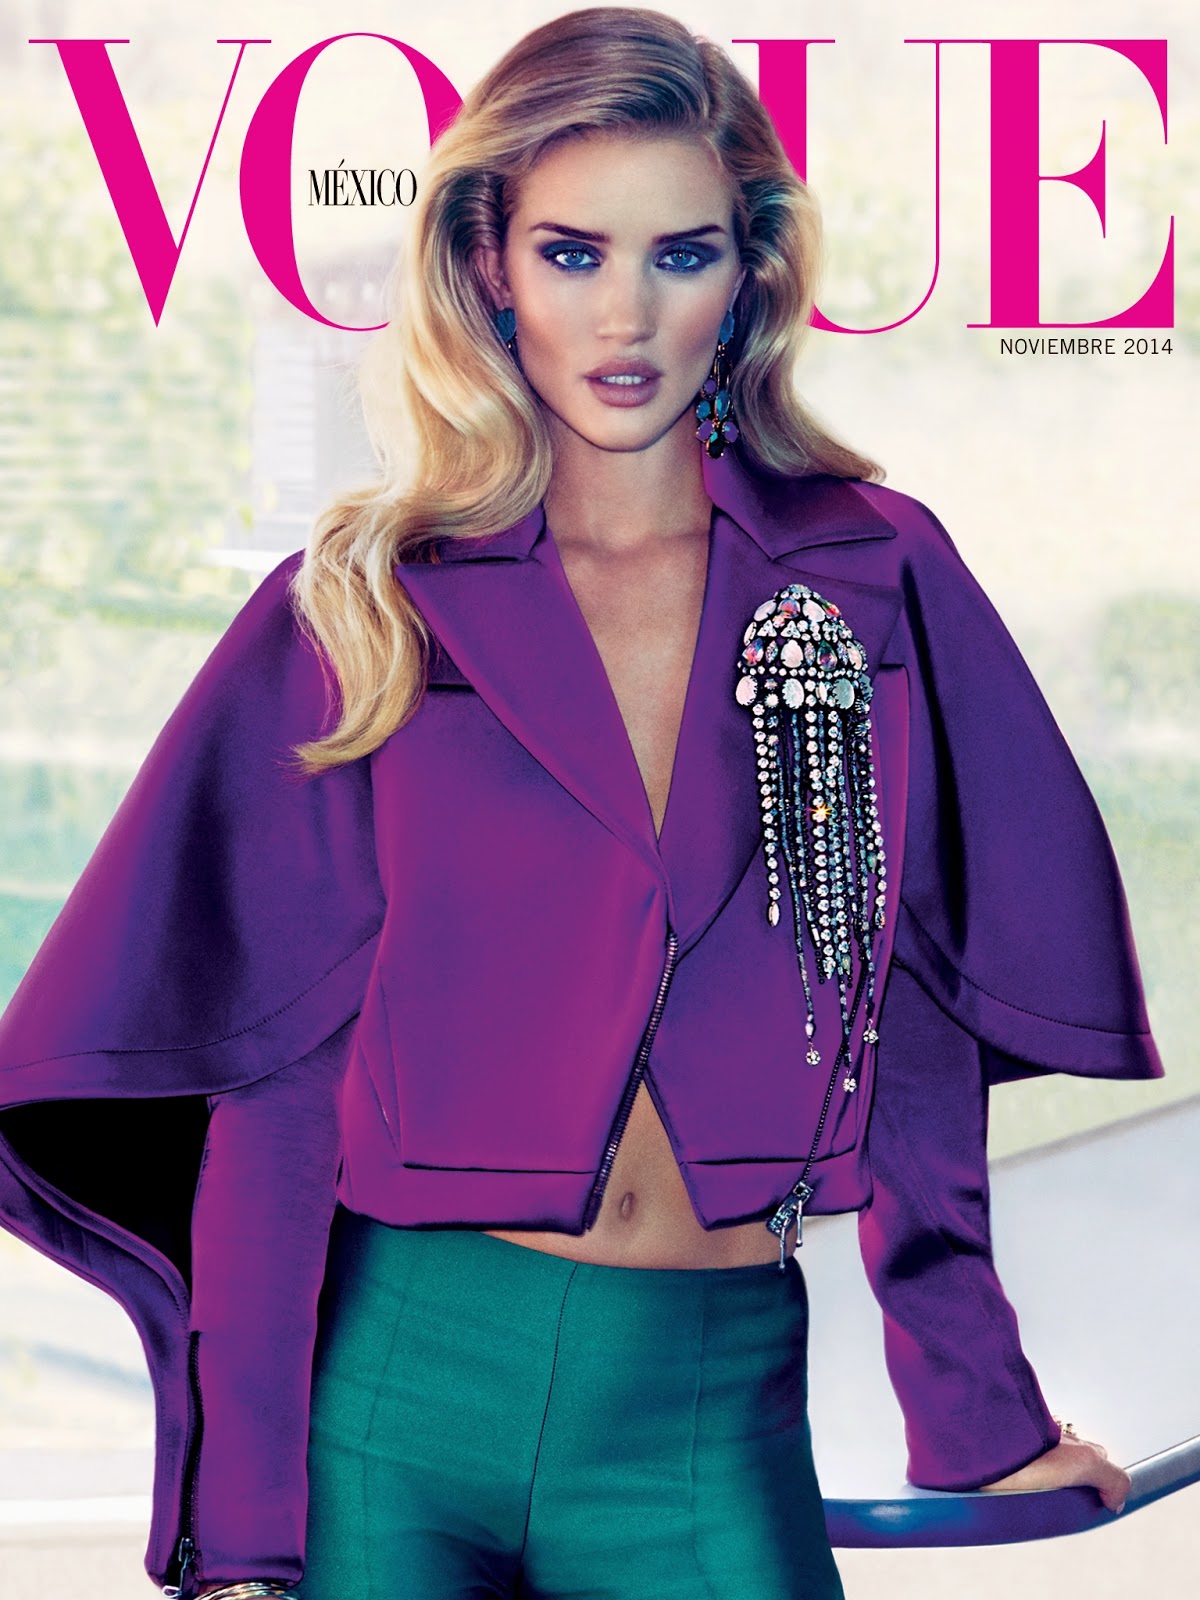 Beautiful Model Rosie Huntington-Whiteley Modeling For The Cover Of Vogue Mexico Modeling As One Of The Highest Paid Models In The World. Beautiful Hair And Makeup Looks For The Spring And Summer Seasons.